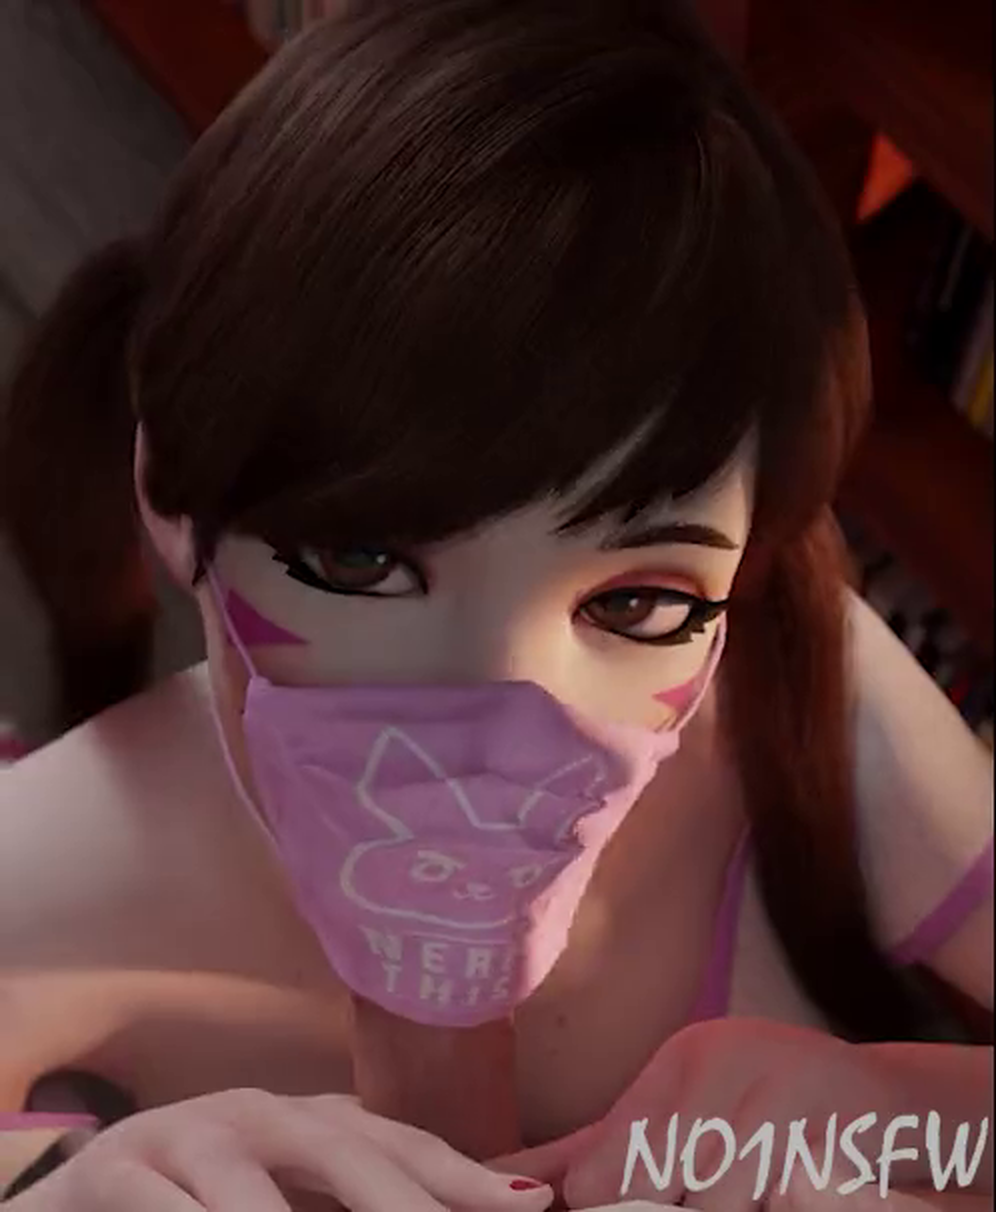 Video by sfmcompile with the username @sfmcompile, who is a brand user,  November 30, 2020 at 6:14 AM. The post is about the topic Hentai and the text says 'D.va sucking under the mask #dva #overwatch #hentai #Rule34 #blowjob'